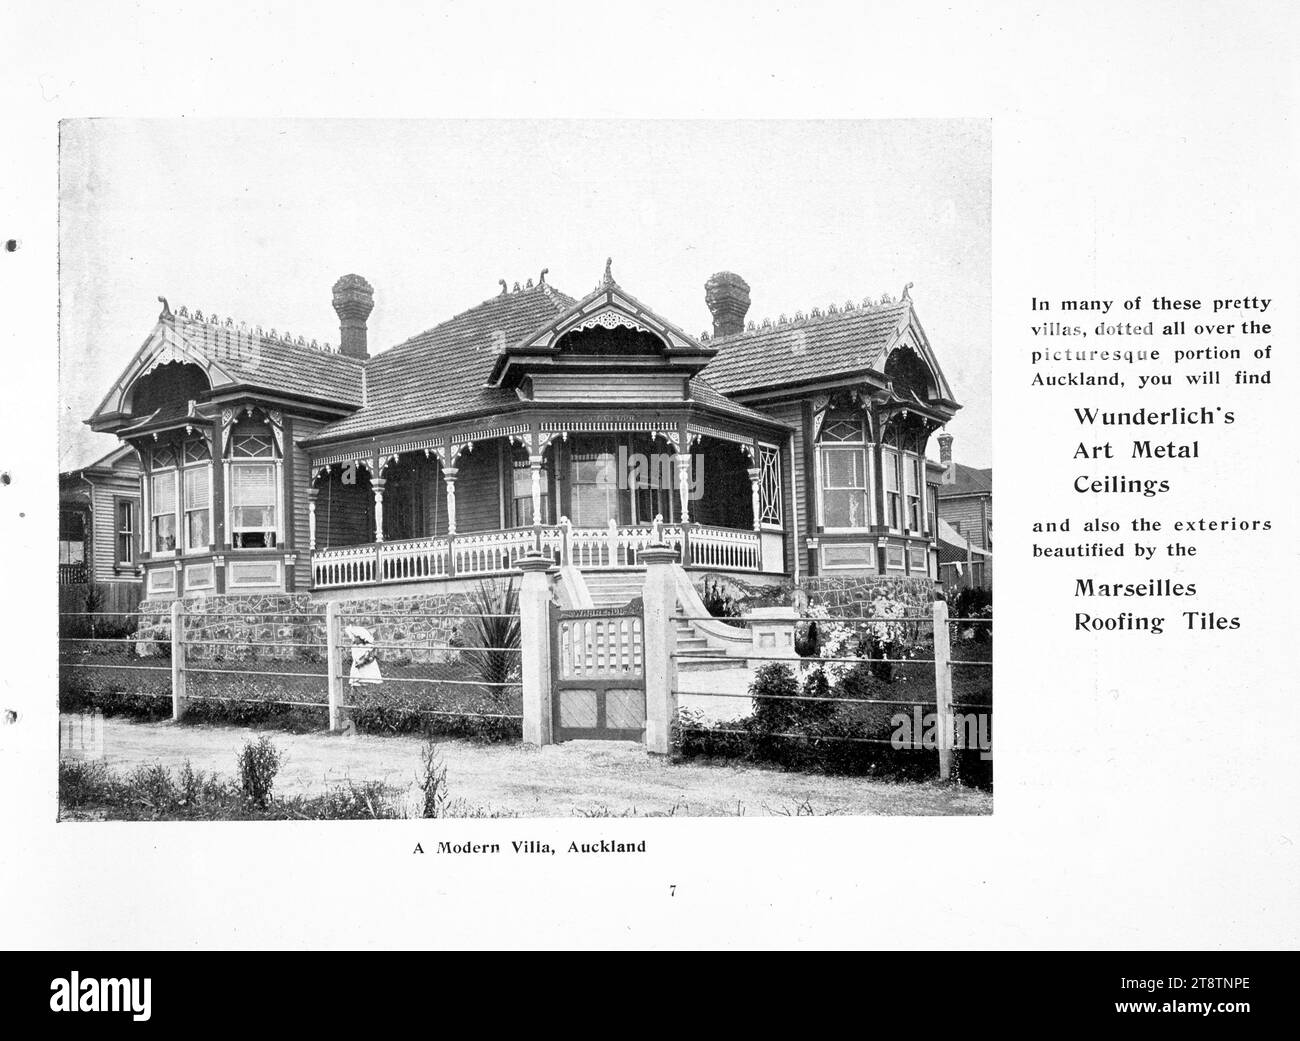 Briscoe & Co Ltd: A modern villa, Auckland, New Zealand. In many of these pretty villas, dotted all over the picturesque portion of Auckland, New Zealand, you will find Wunderlich's art metal ceilings, and also the exteriors beautified by the Marseilles Roofing Tiles. 1906-1908, Shows a wooden villa on stone foundations seen from the street, with a verandah, and tiled roof with decorated ridgepole Stock Photo